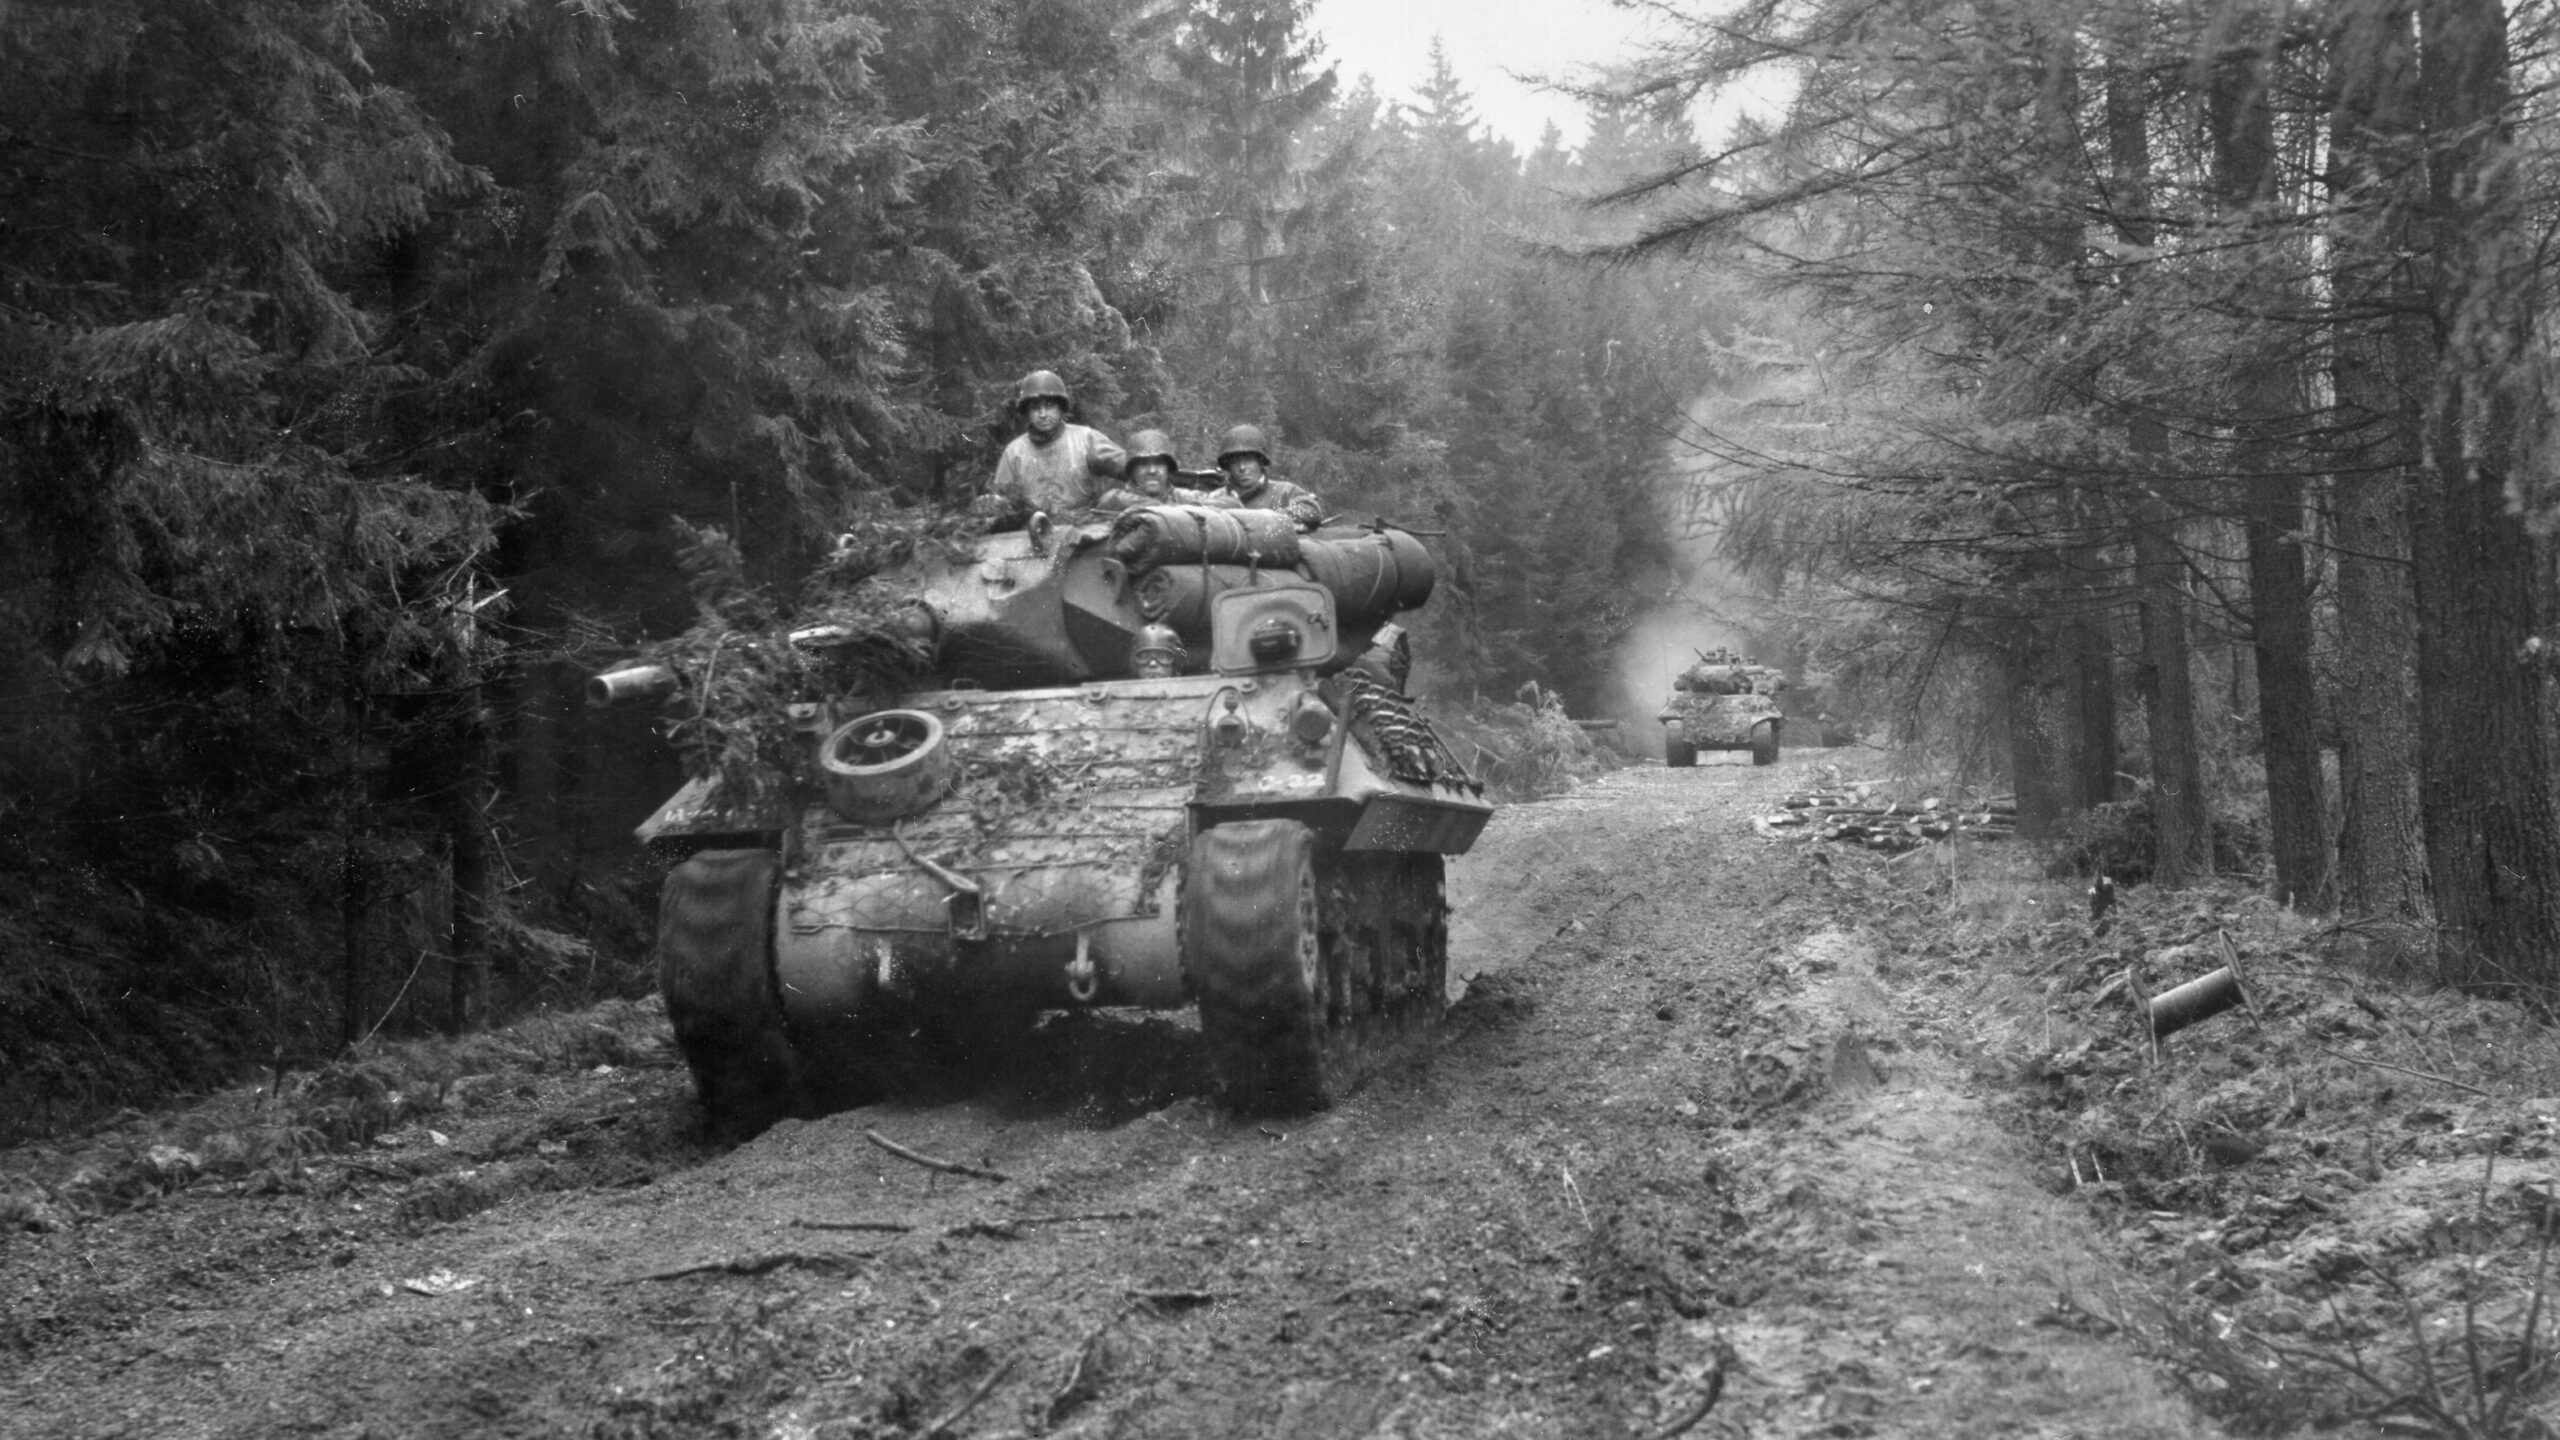 Vehicles from the 893rd Tank Destroyer Battlion roll down a logging trail through the Hürtgen Forest on their way to support the 28th Infantry Division at Schmidt, November 4, 1944.